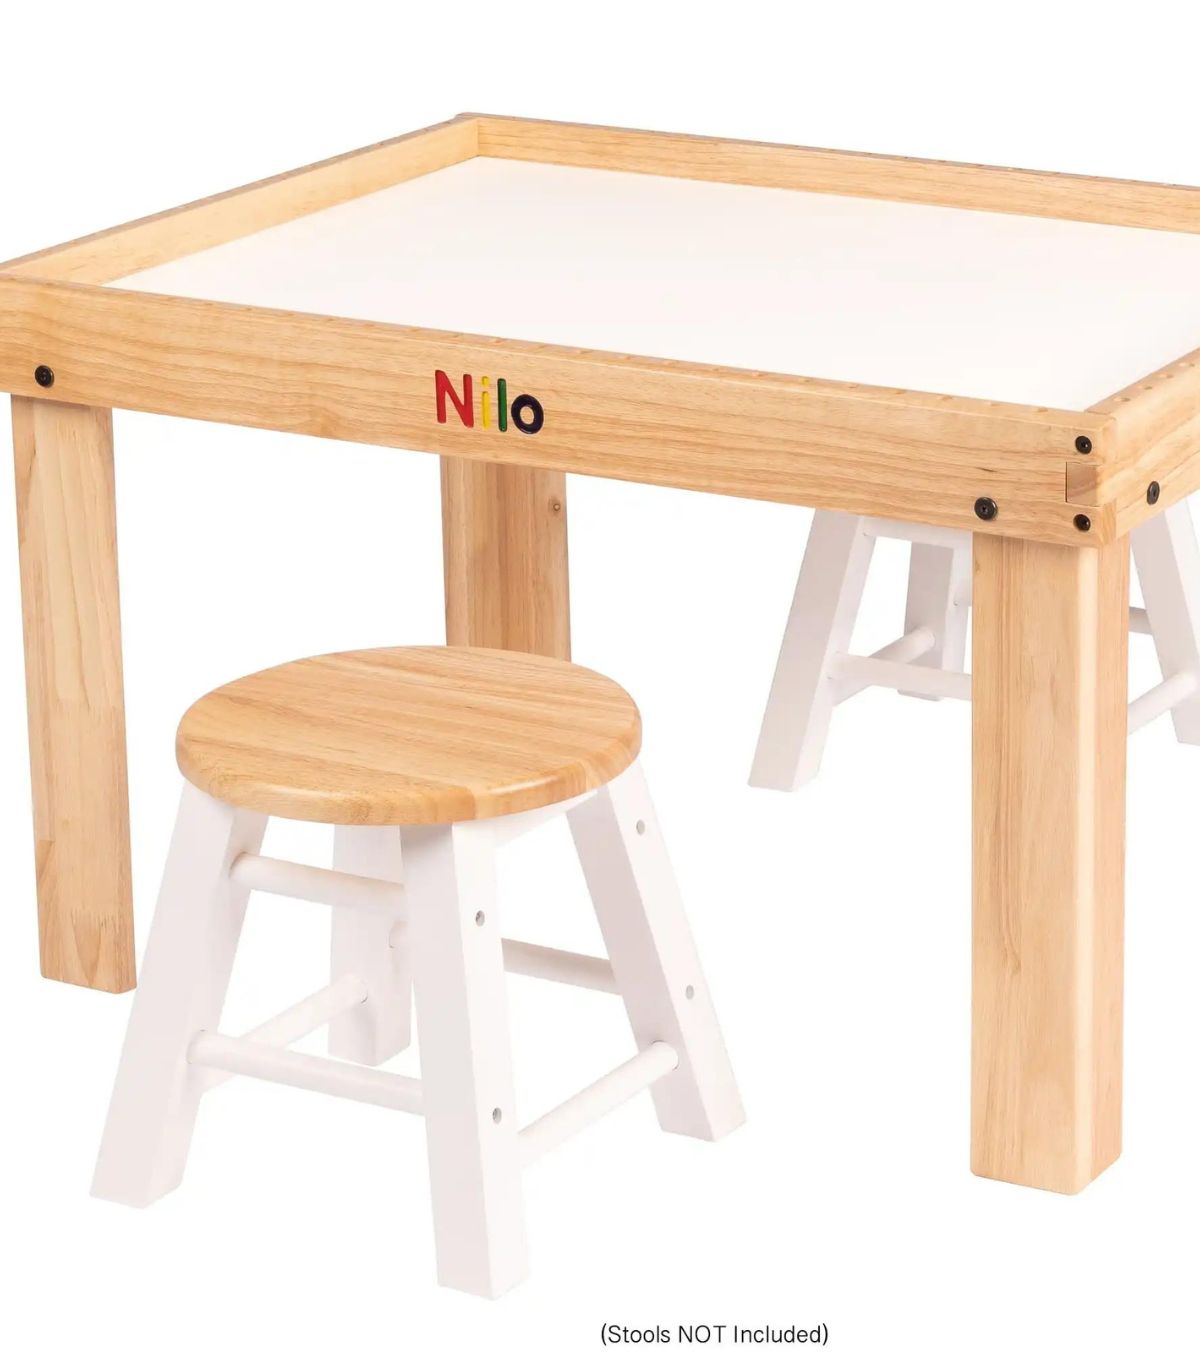 2 + 1 Activity Tables